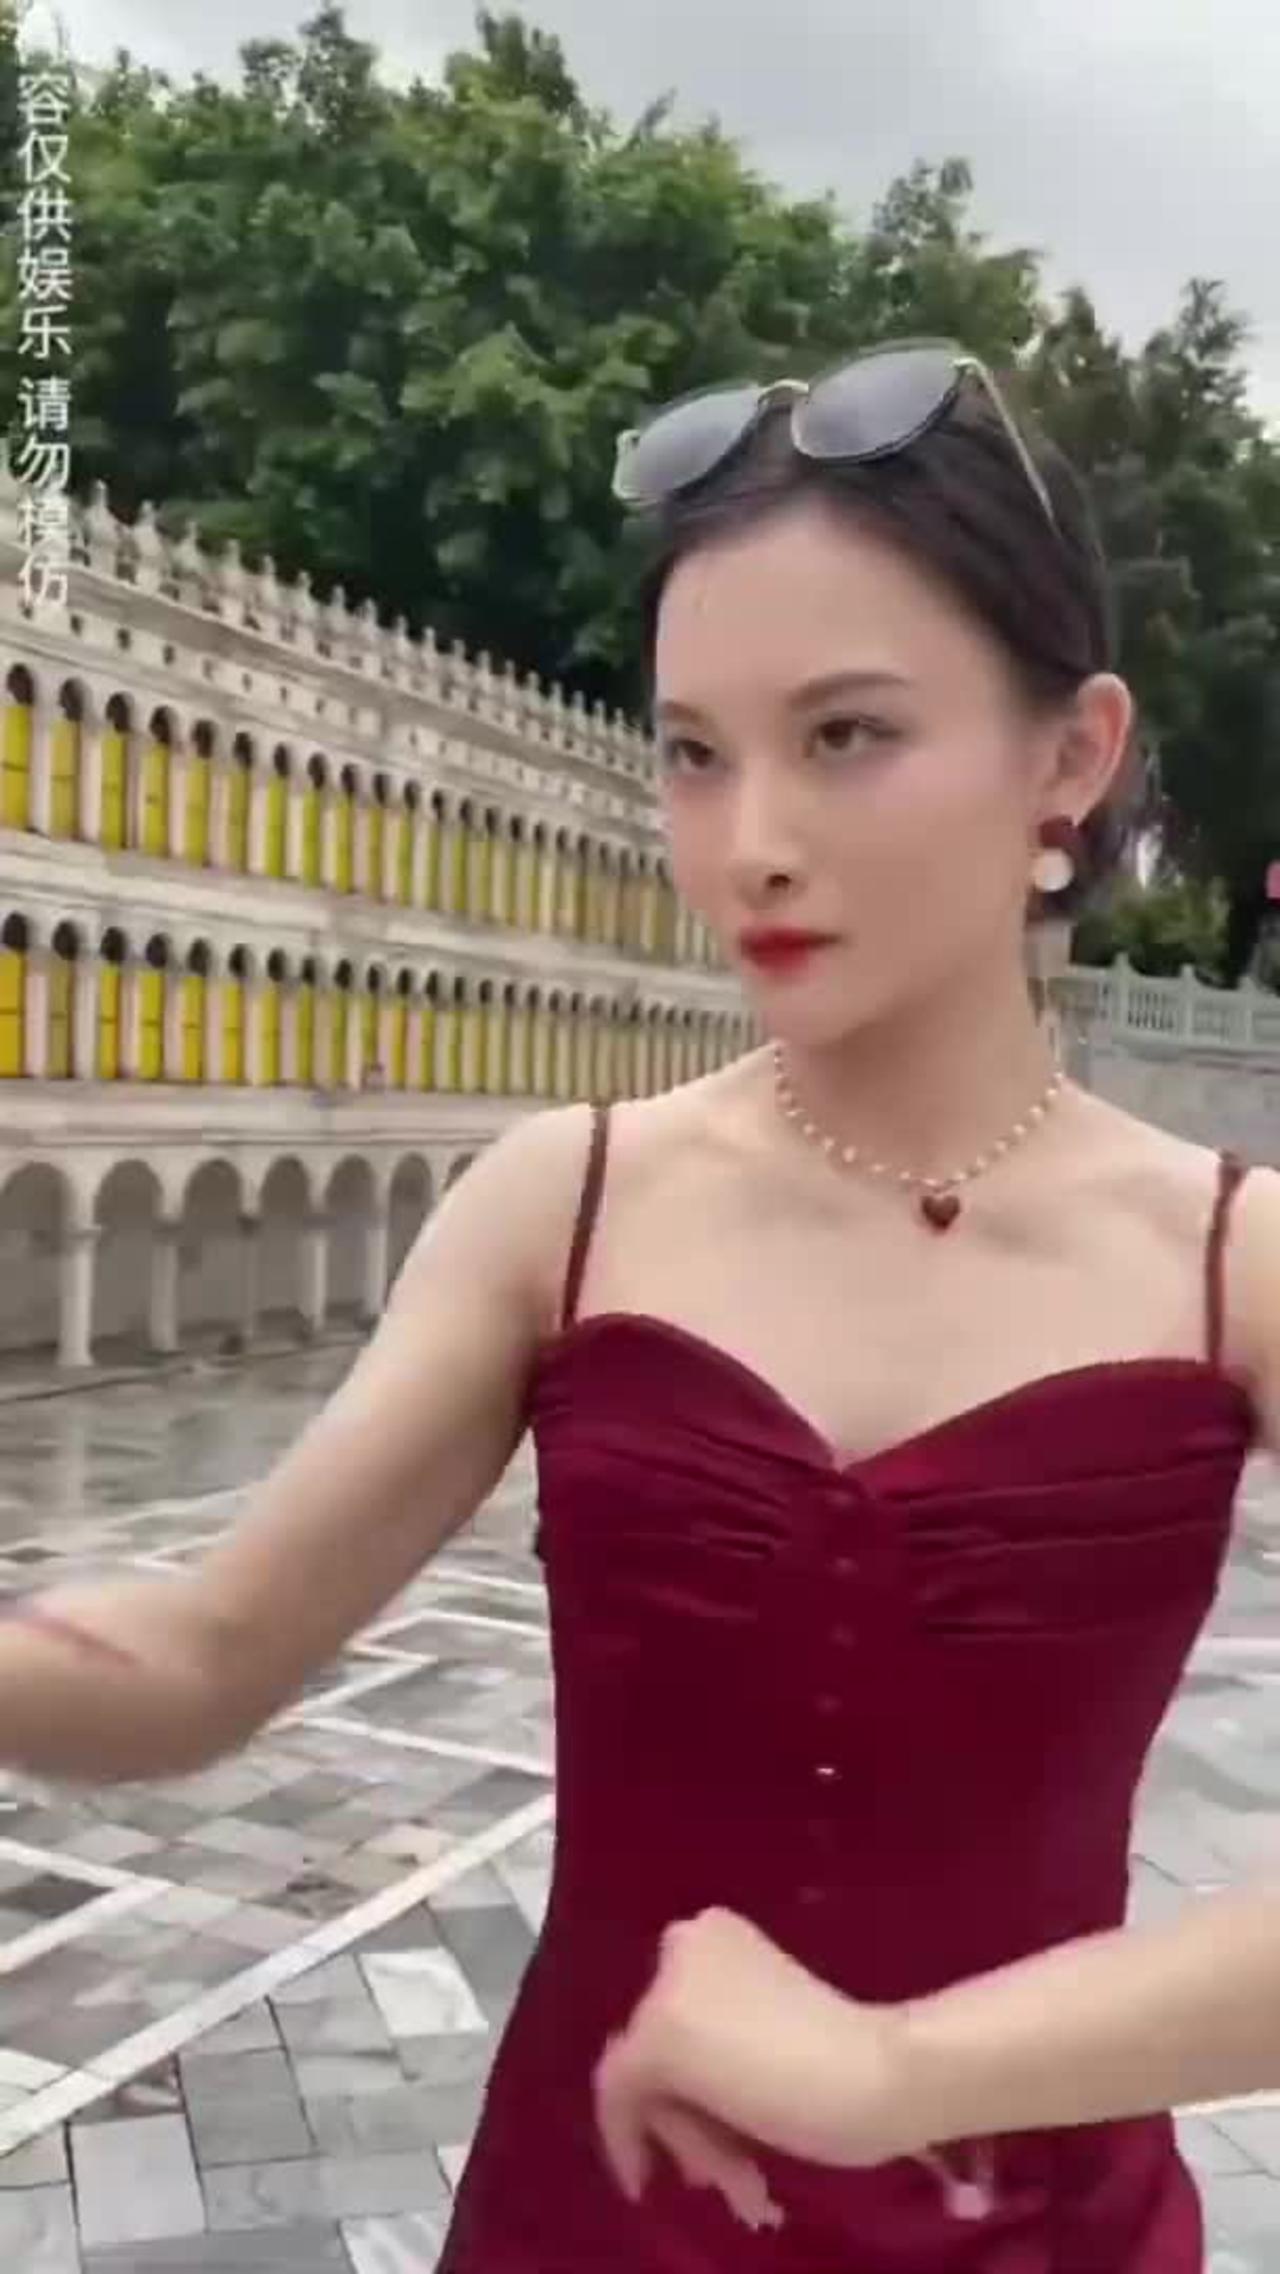 Chinese Woman in Red Dress Dodging Bat Full Video.